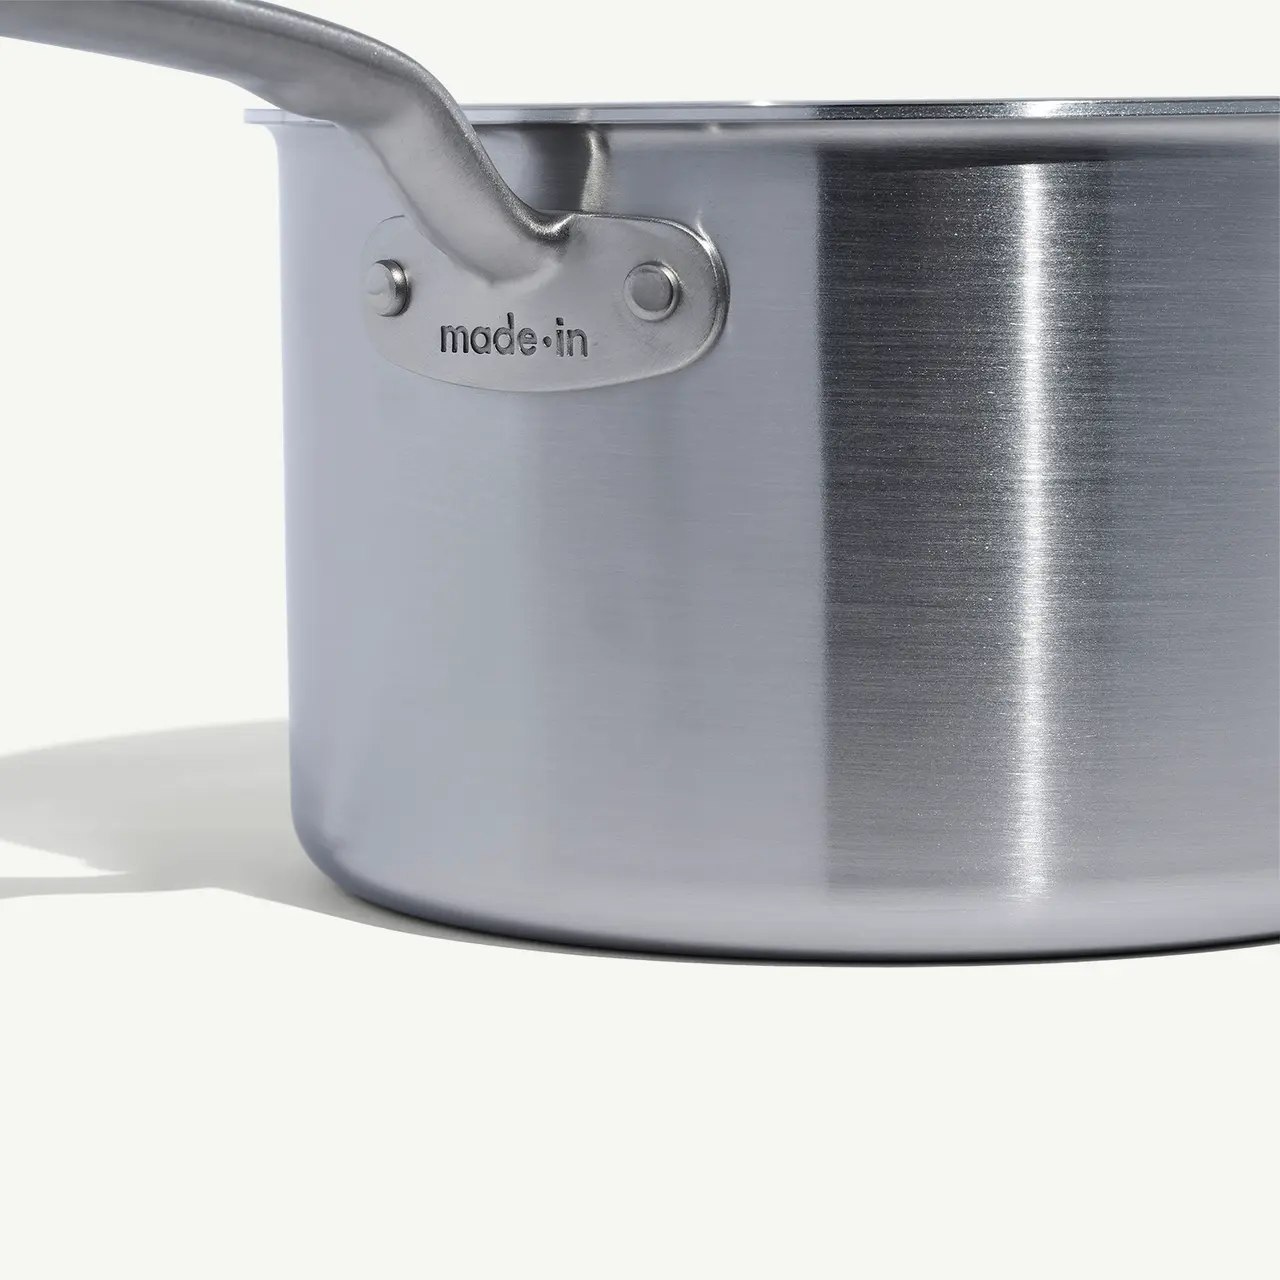 A stainless steel pot with the inscription "made in" on its handle, set against a white background.